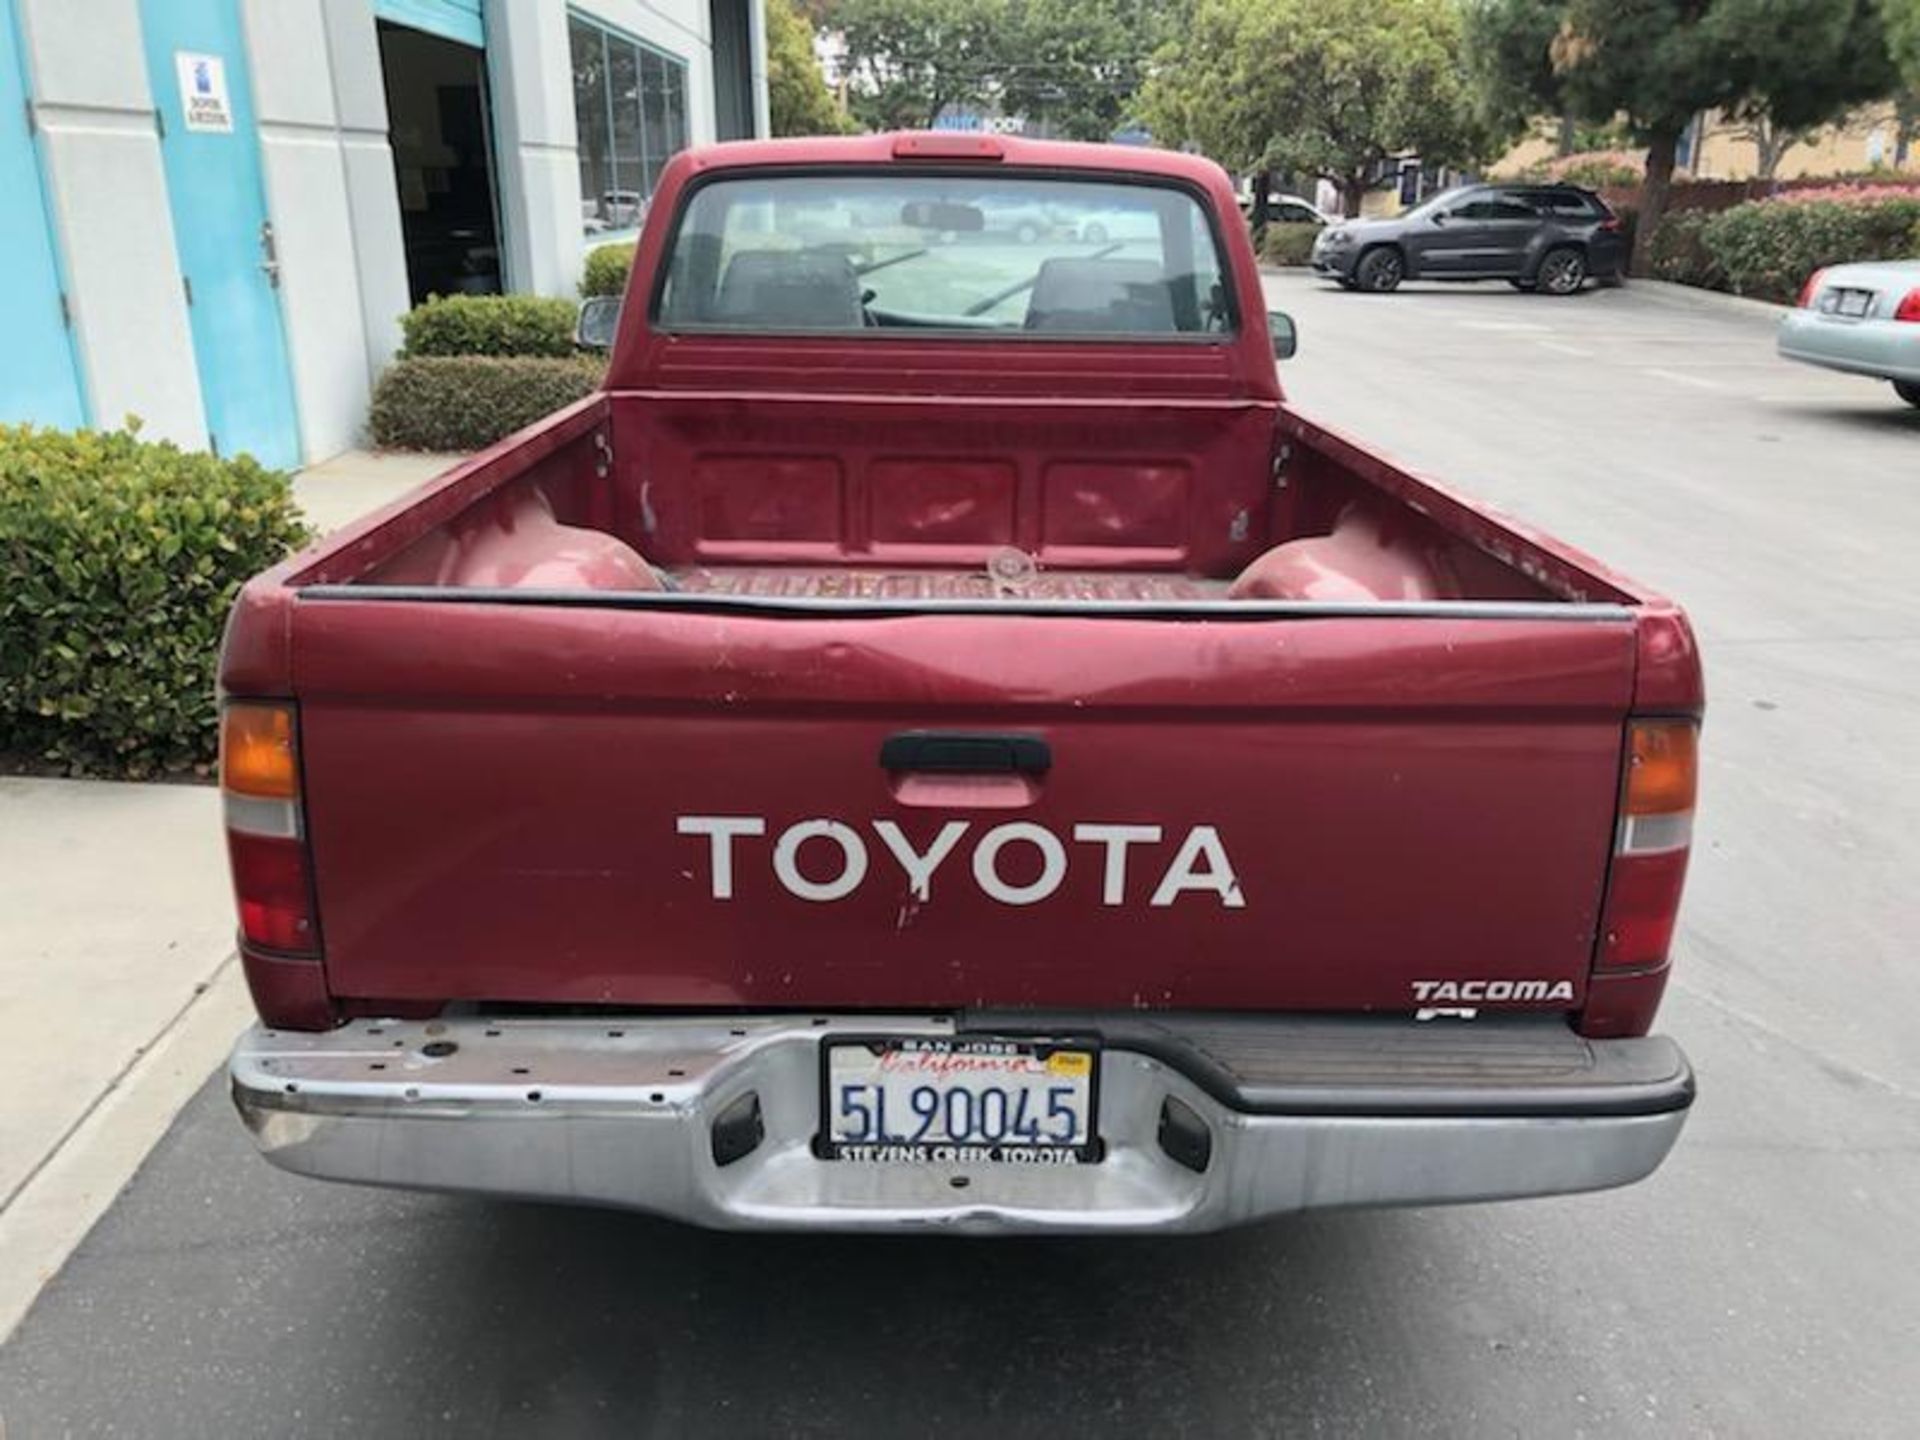 1997 Toyota Tacoma Truck with 355,395 miles - Image 4 of 5